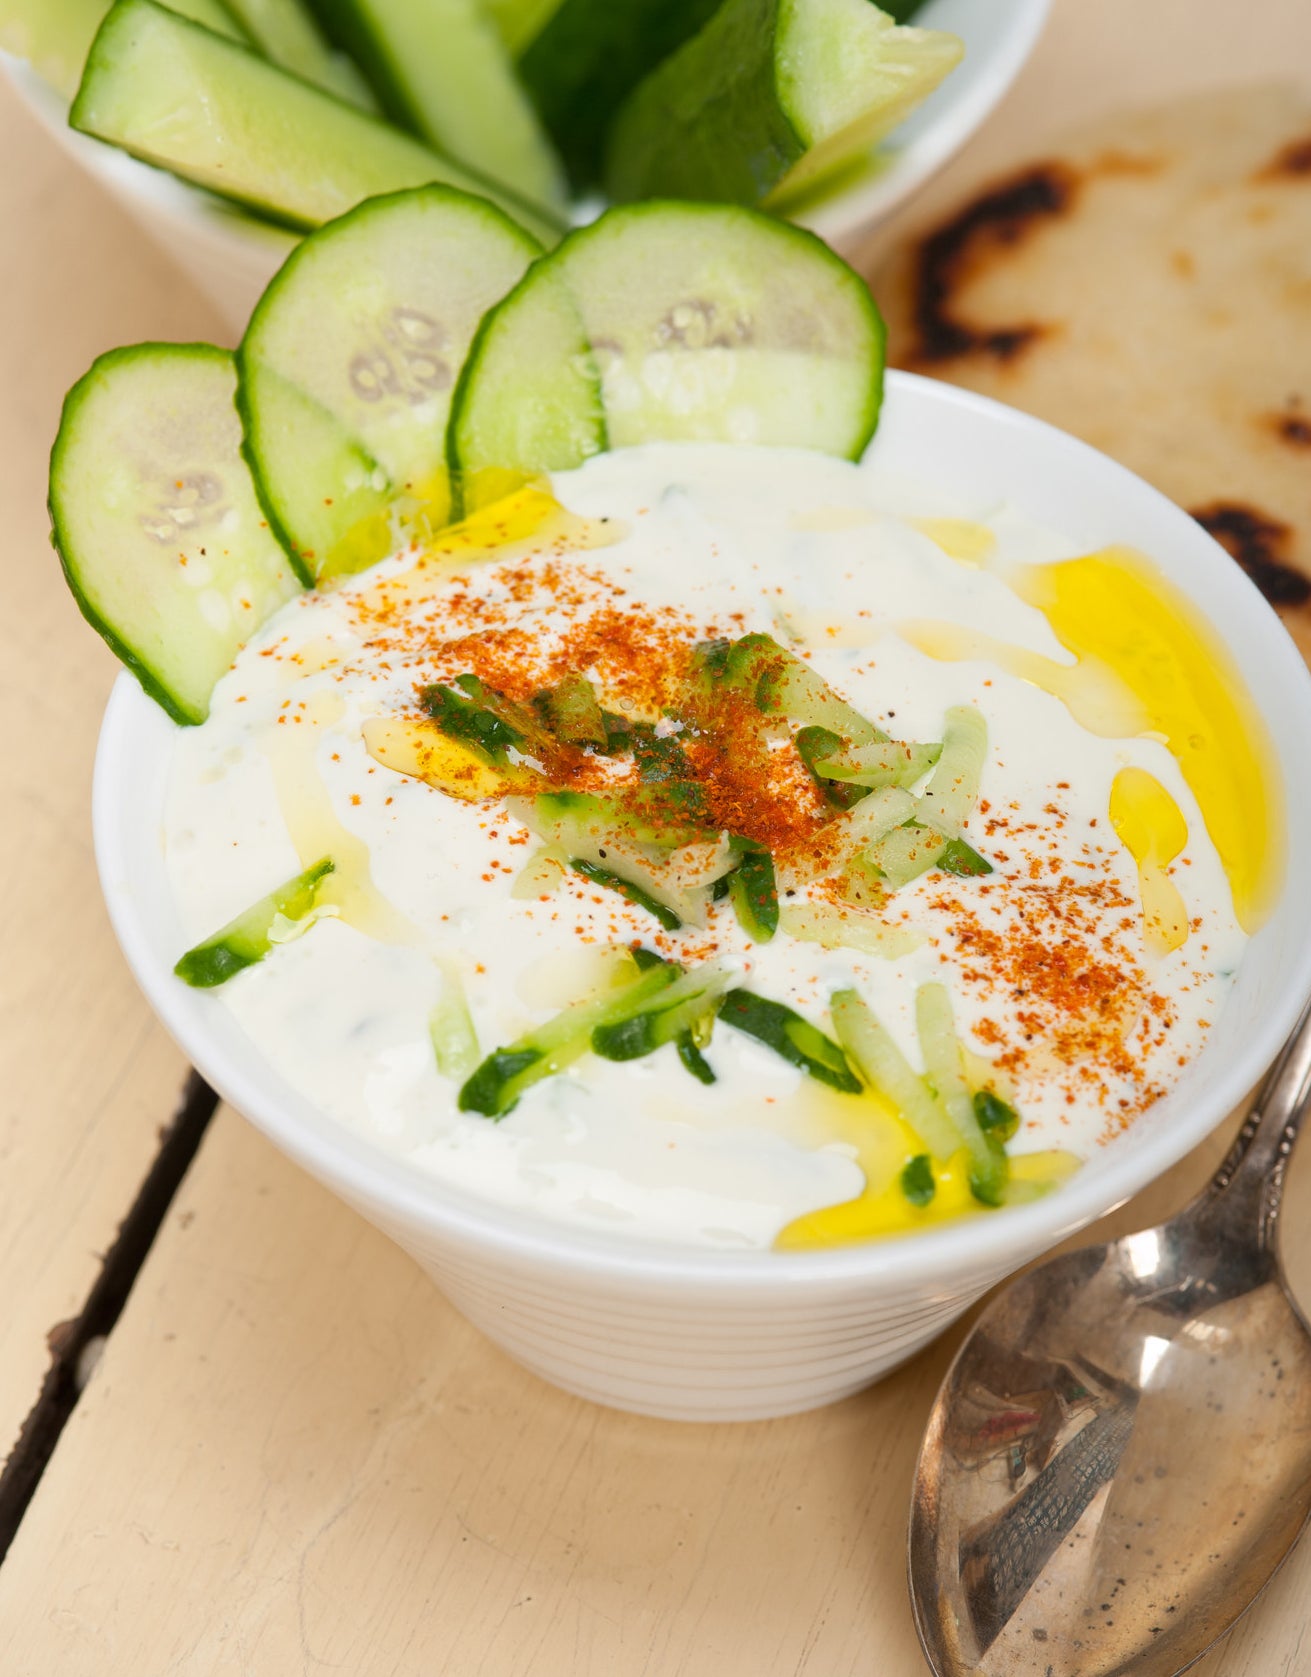 Cucumbers with plain yogurt for dipping.